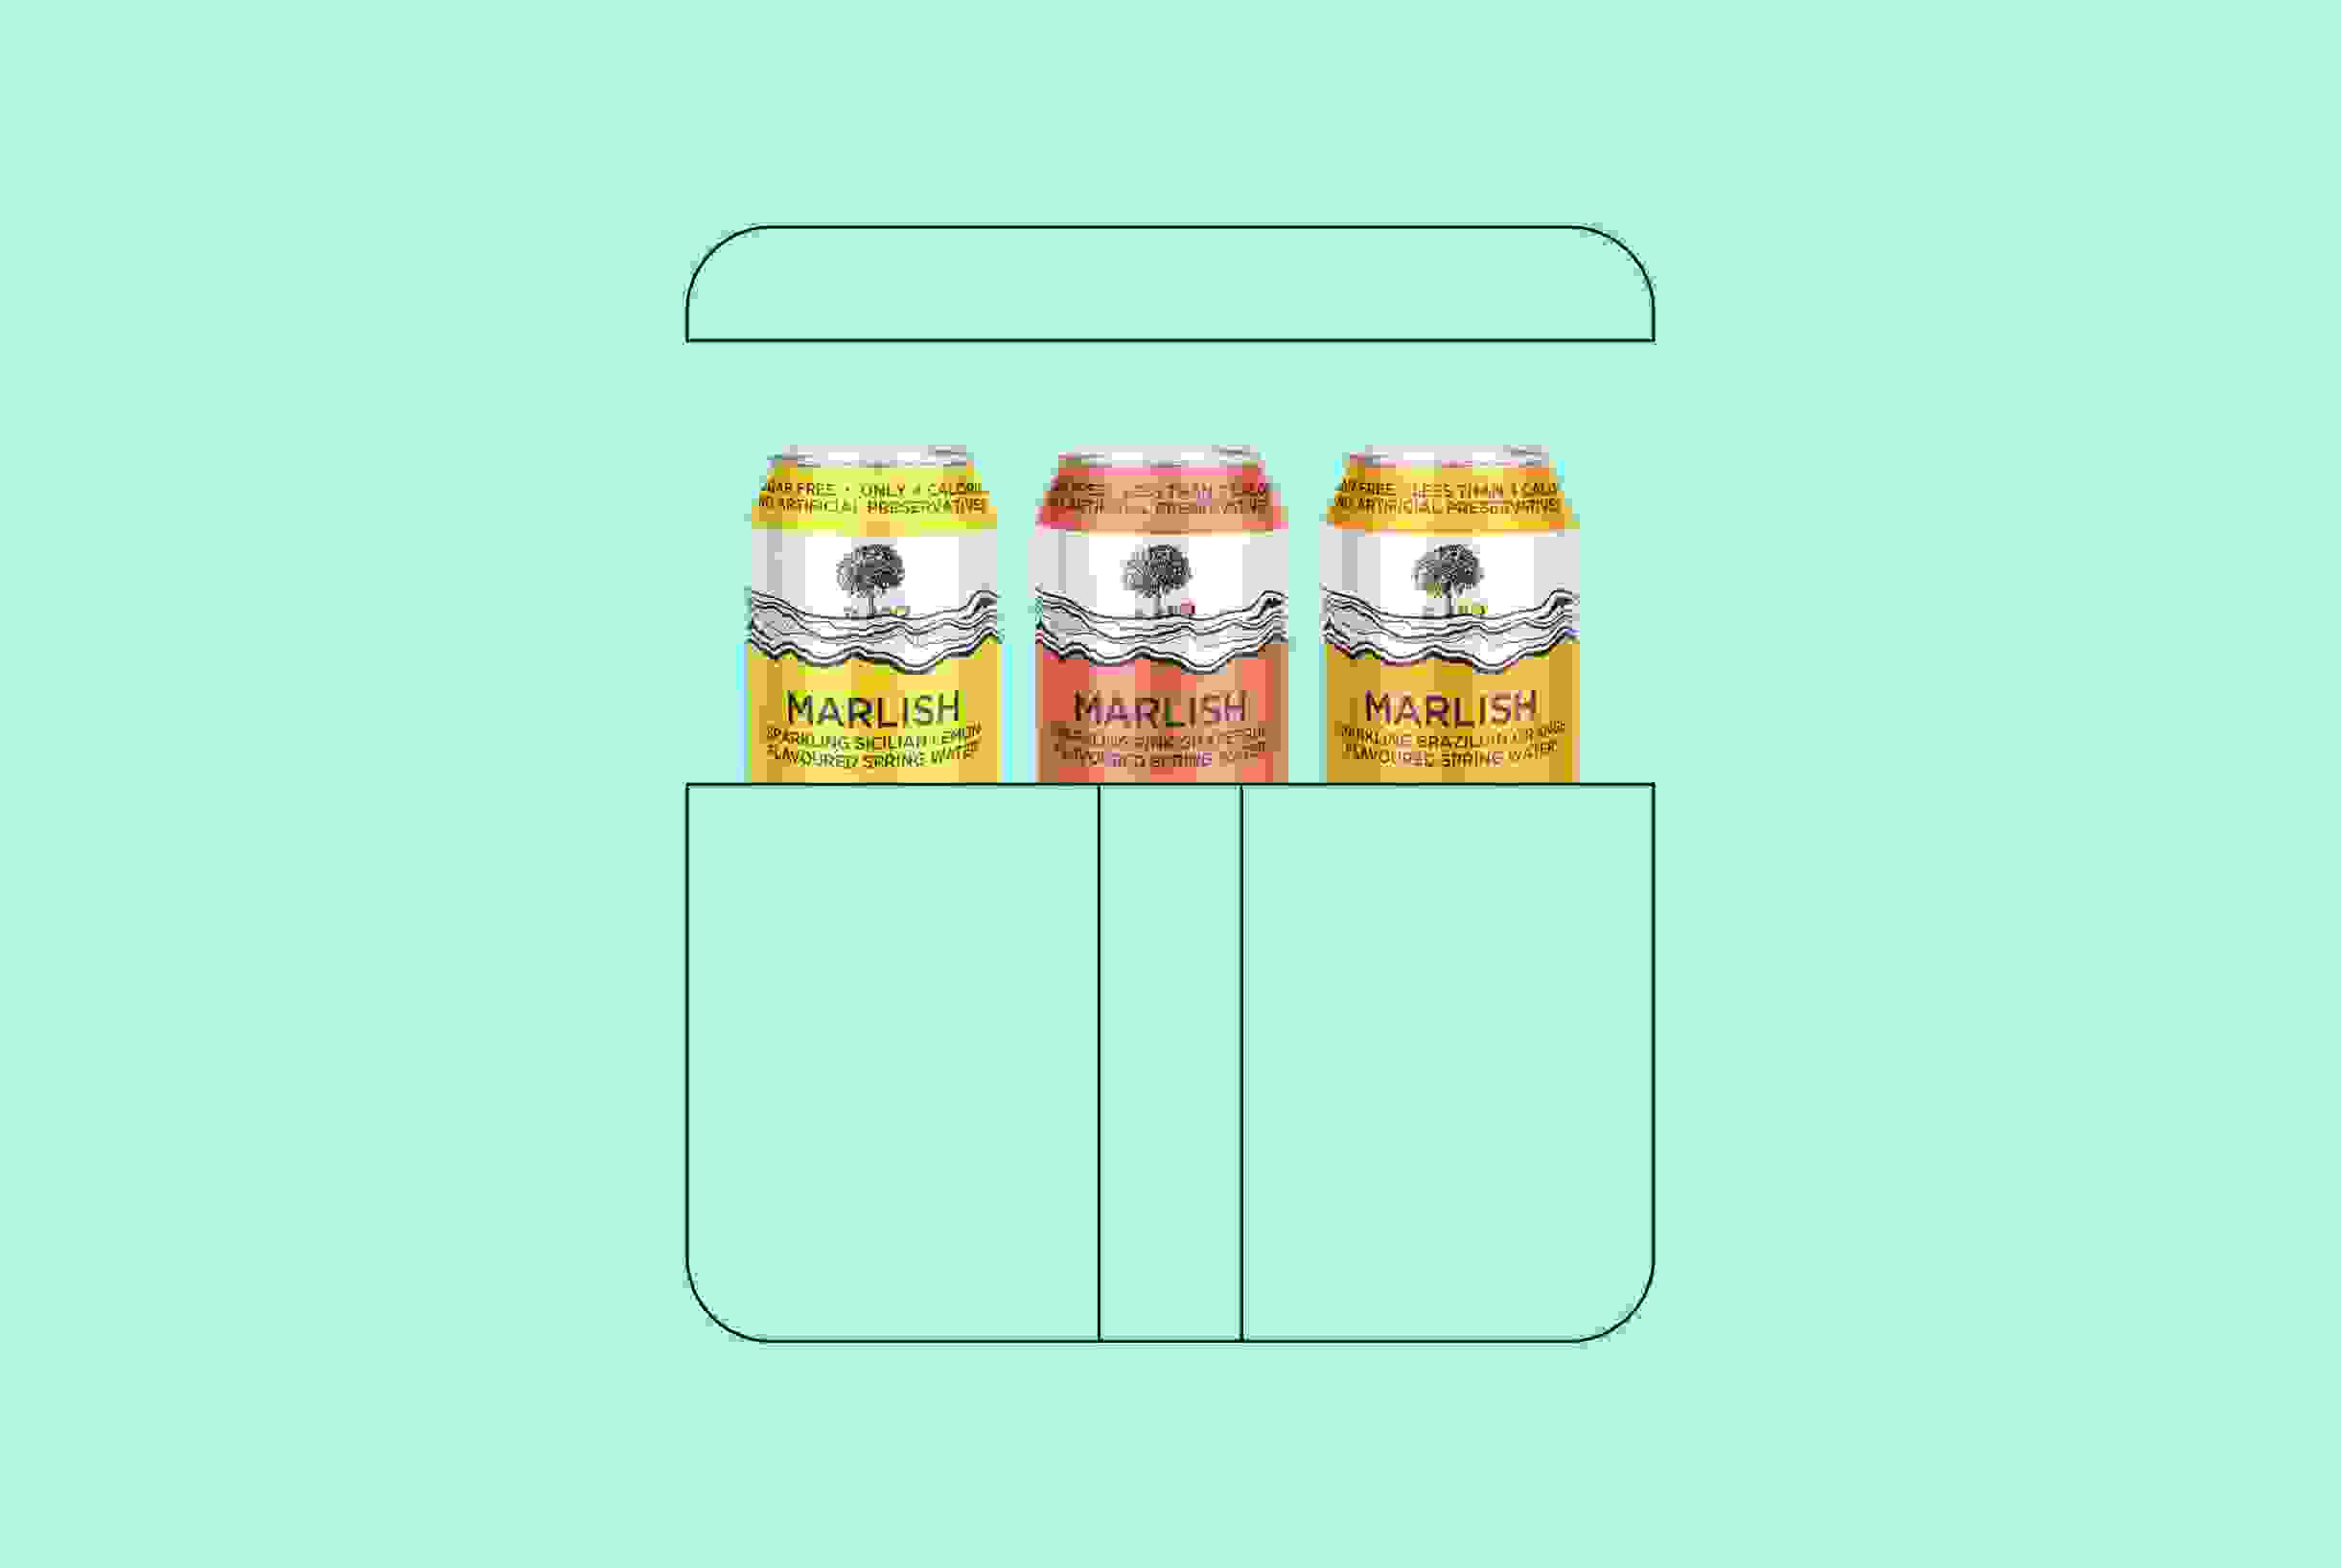 A mock-up of 2 Marlish water cans in an illustrated packaging holder